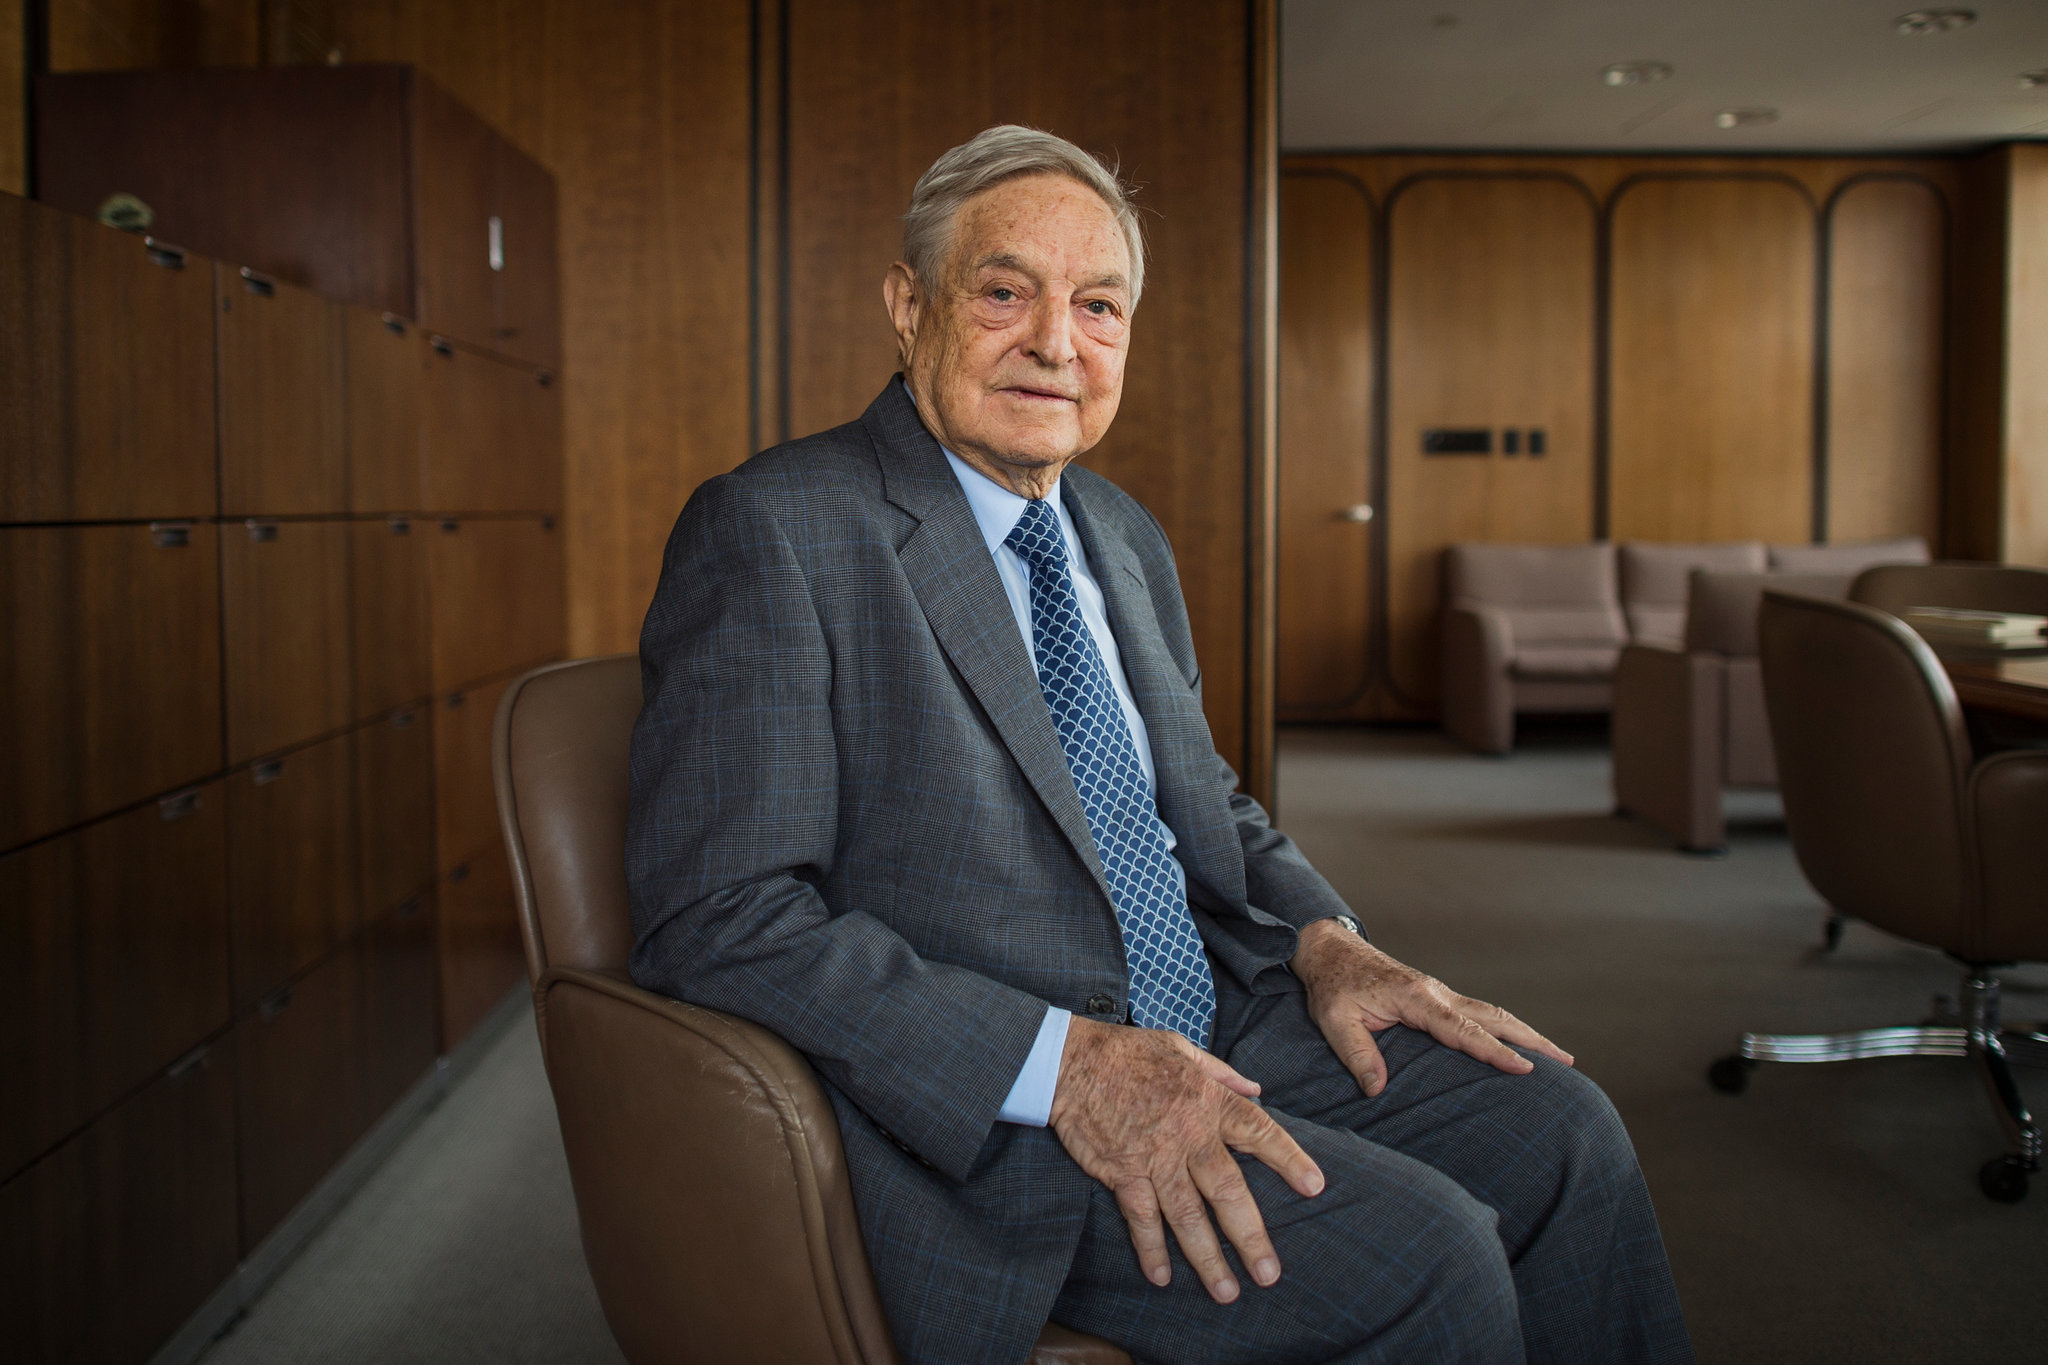 George Soros: An influential figure shaping global politics and philanthropy